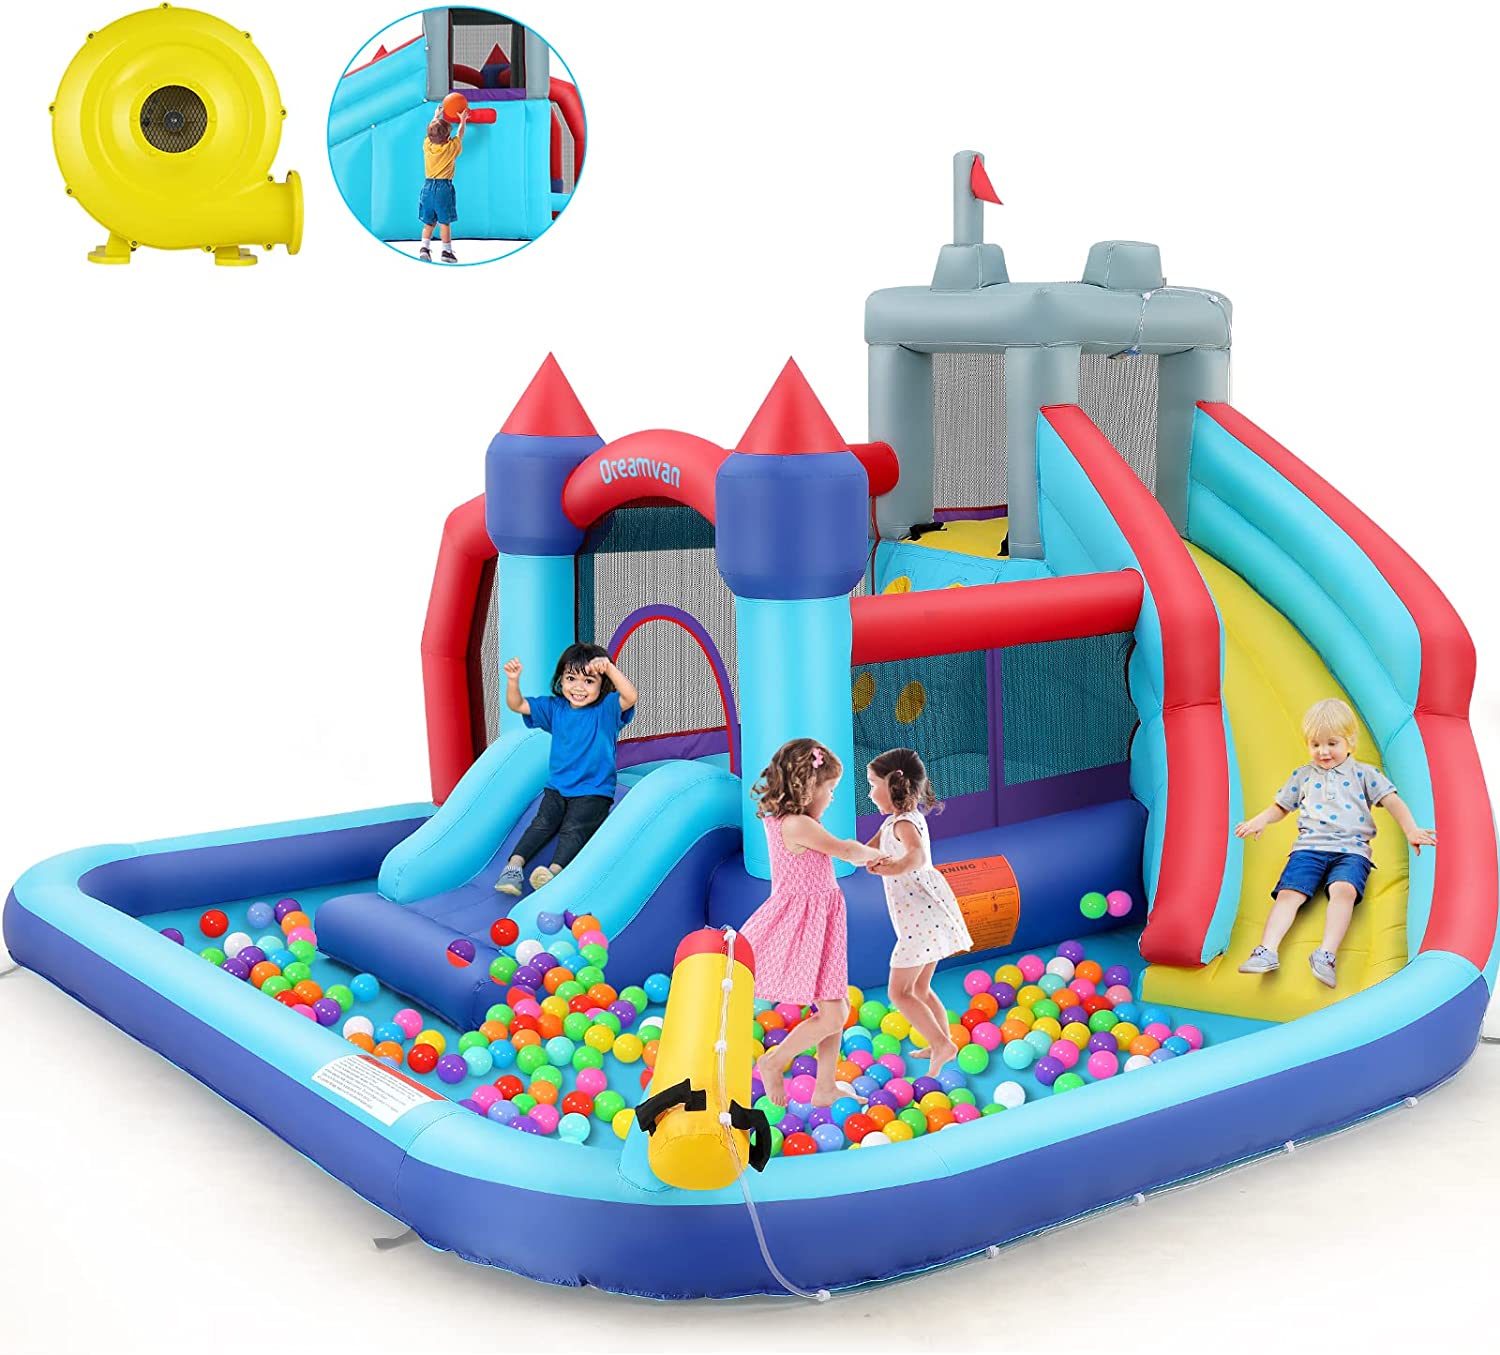 Qhomic Inflatable Bounce House for Toddlers with Blower, Children's Castle with Bouncing Slides, Climbing Wall, Bouncing Area, Basketball Hoop, Water Gun, Inflatable Water Slide with Football Area - image 3 of 12